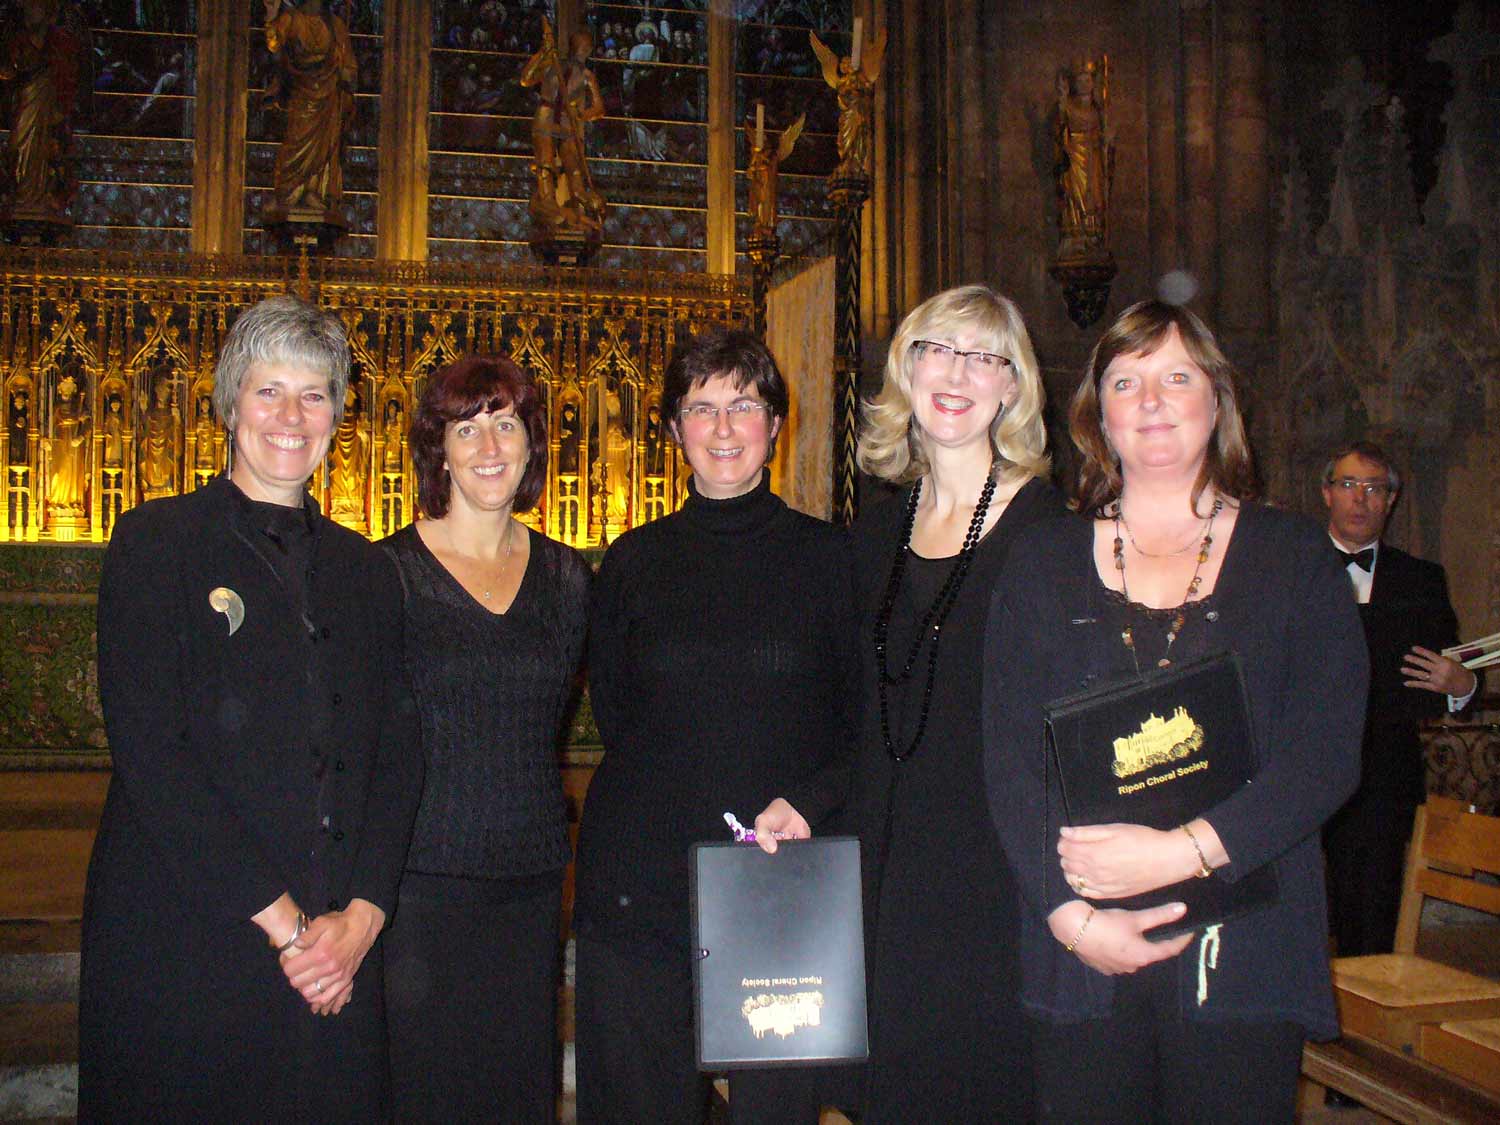 Bridget Taylor-Connor (far left) has organised a Come and Sing Messiah at St John’s Church, Sharow. The event will raise money for Yorkshire Cancer Research in memory of Bridget’s friend, Sally Robinson (far right), who passed away from cancer in 2013